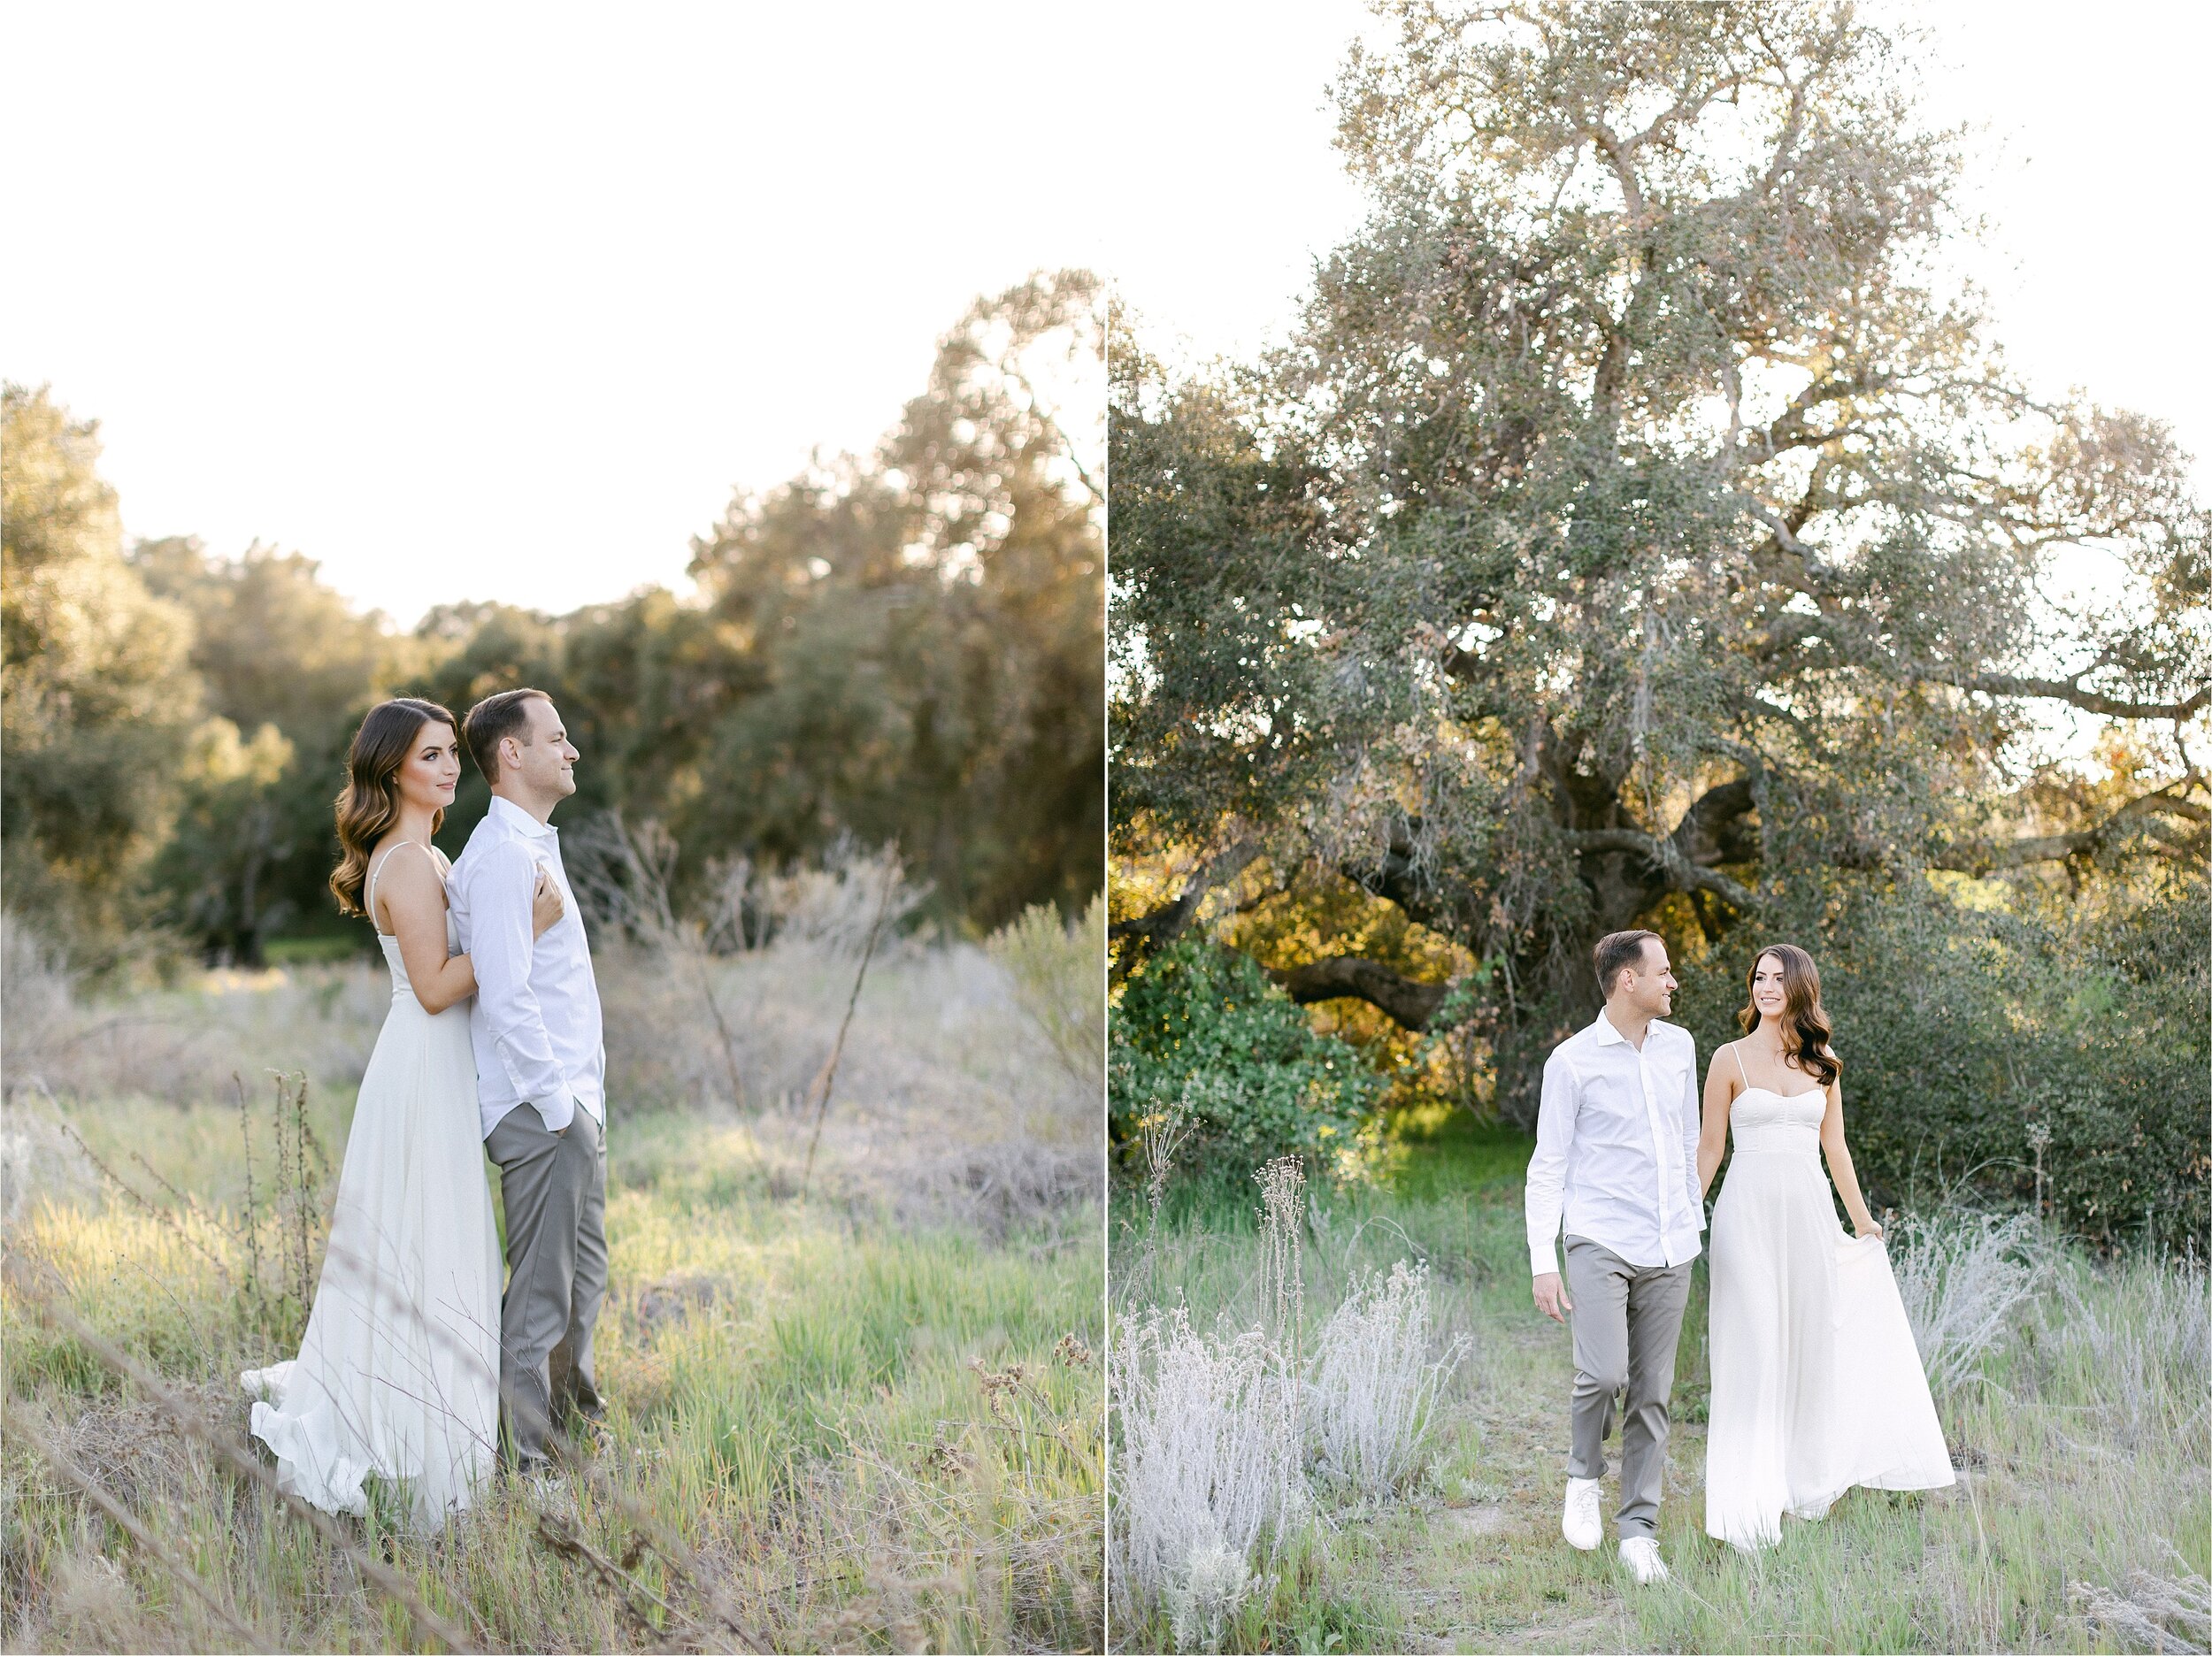 Bride-to-be in white chiffon gown embraces husband from behind as they stare off into the distance in an open field during their engagement photography session in Orange County, CA.